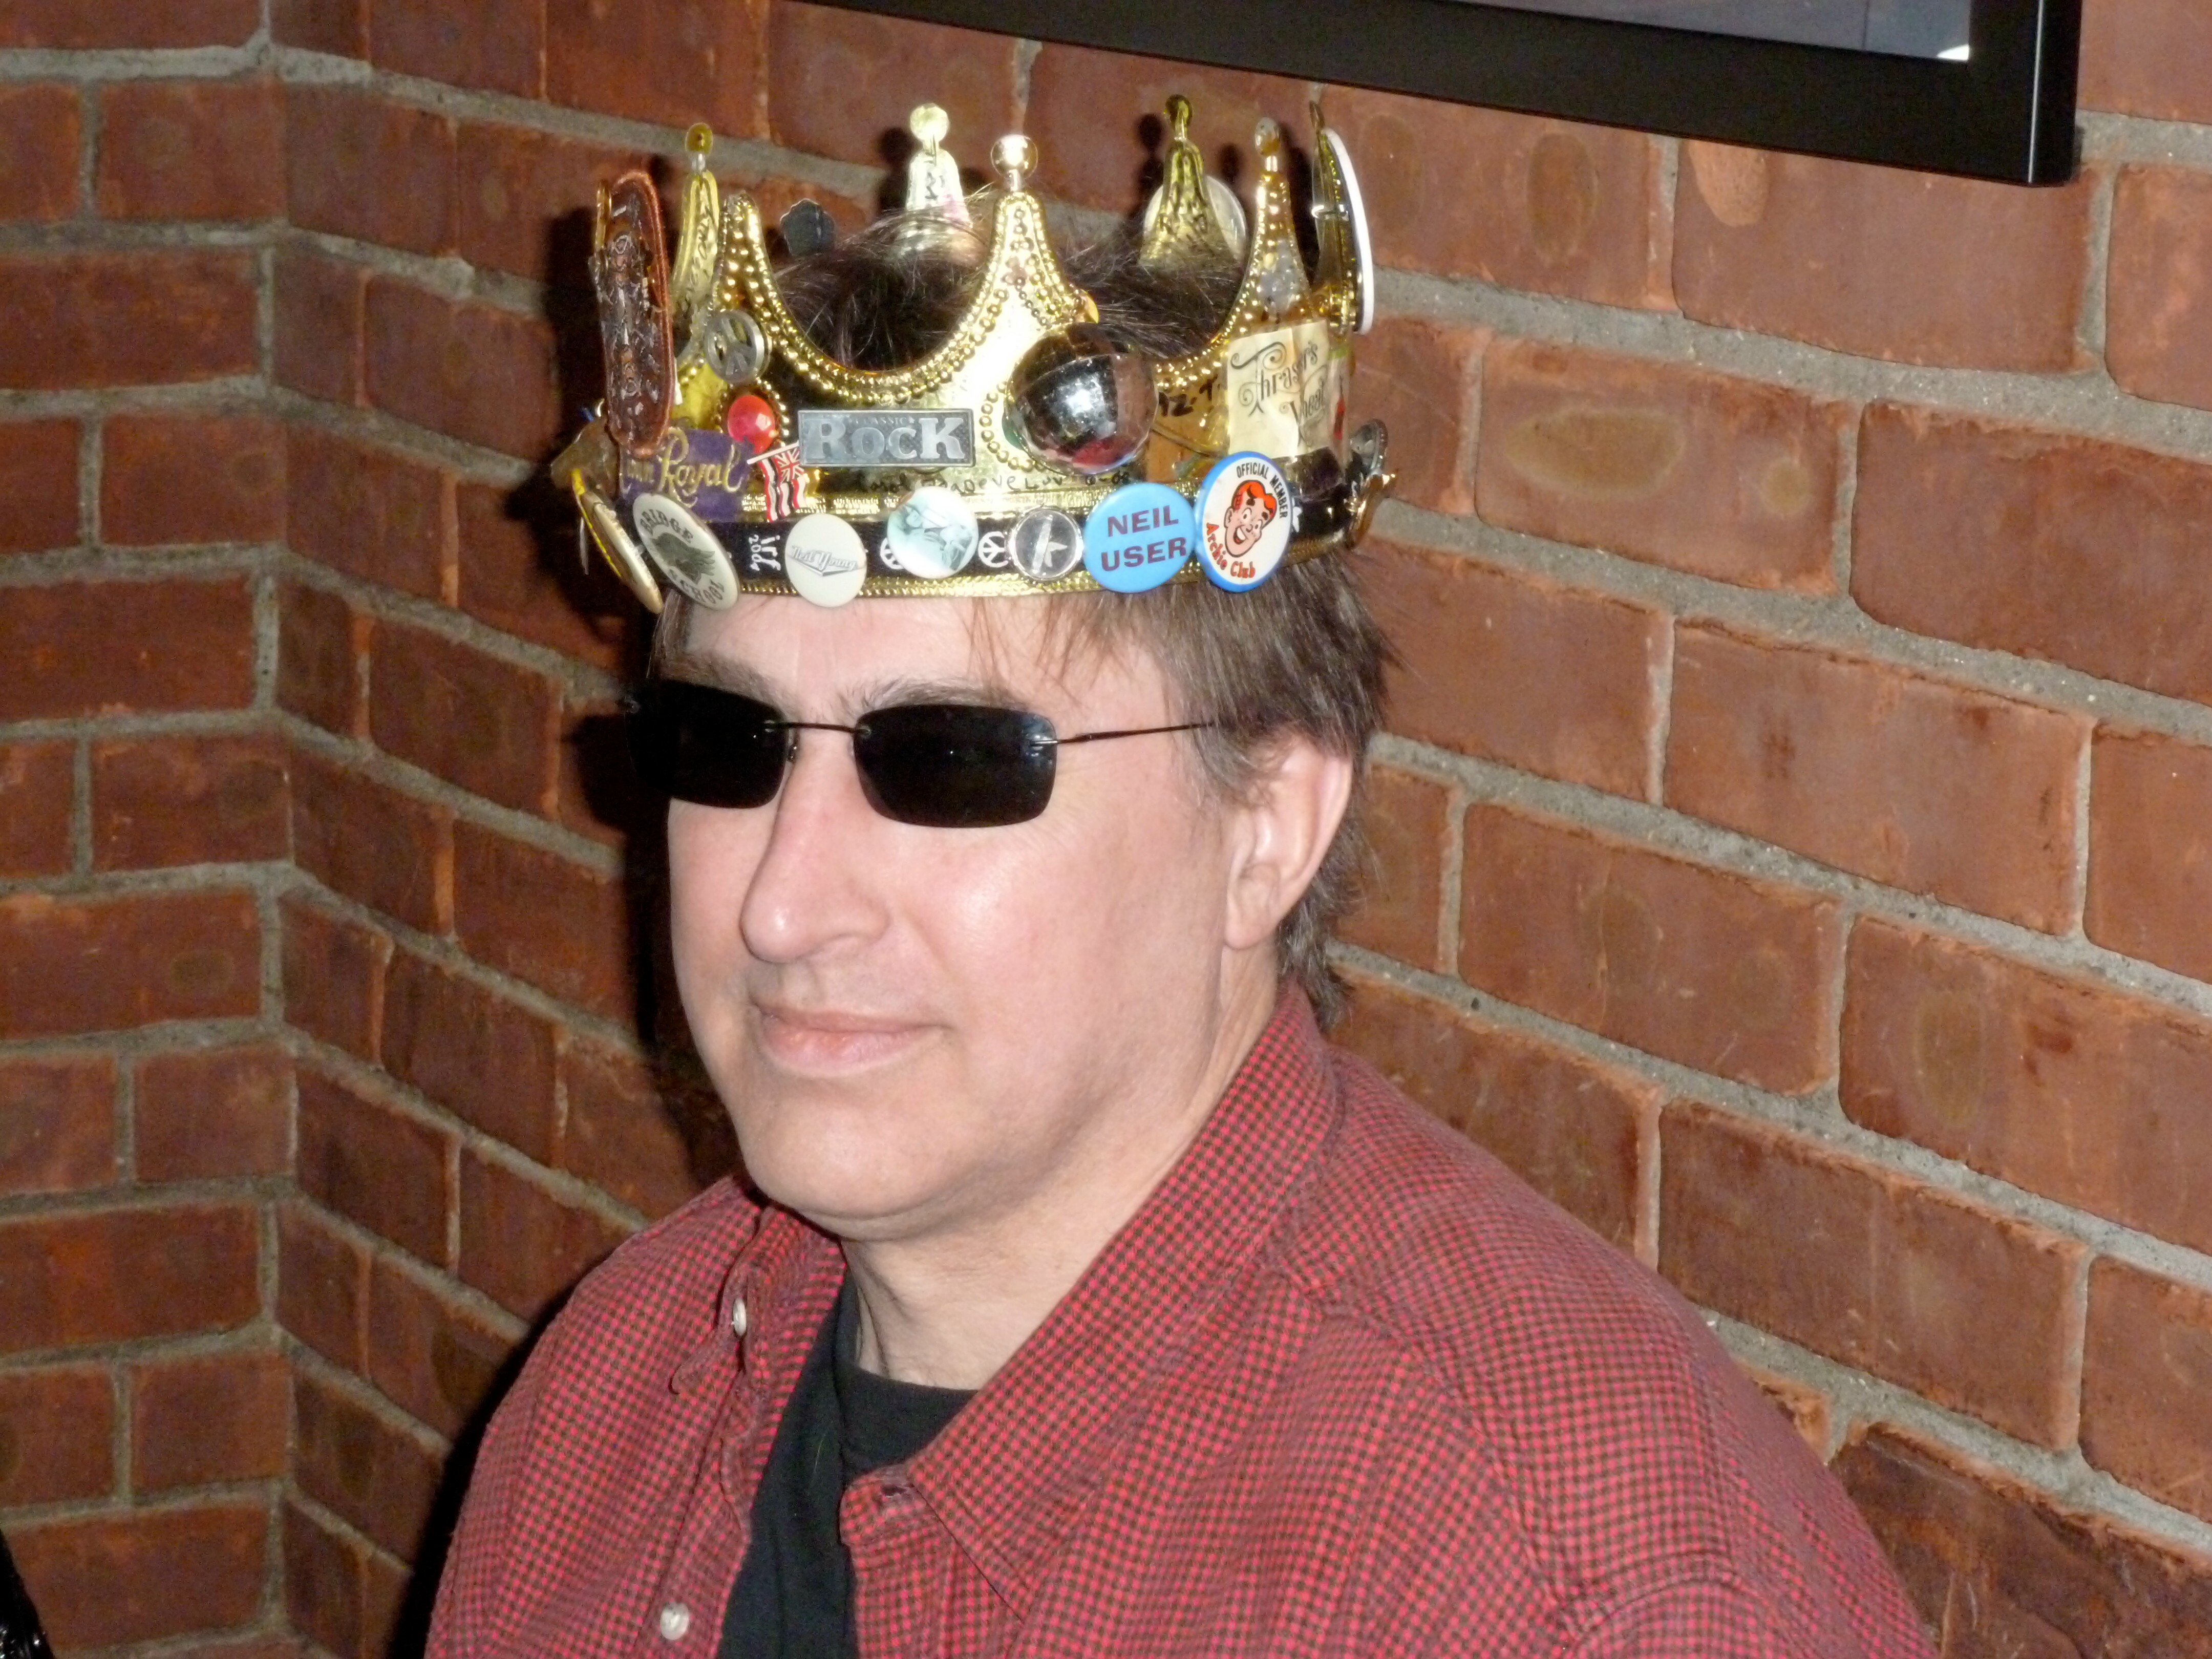 Photo of Bill Sprague wearing the ROTM crown